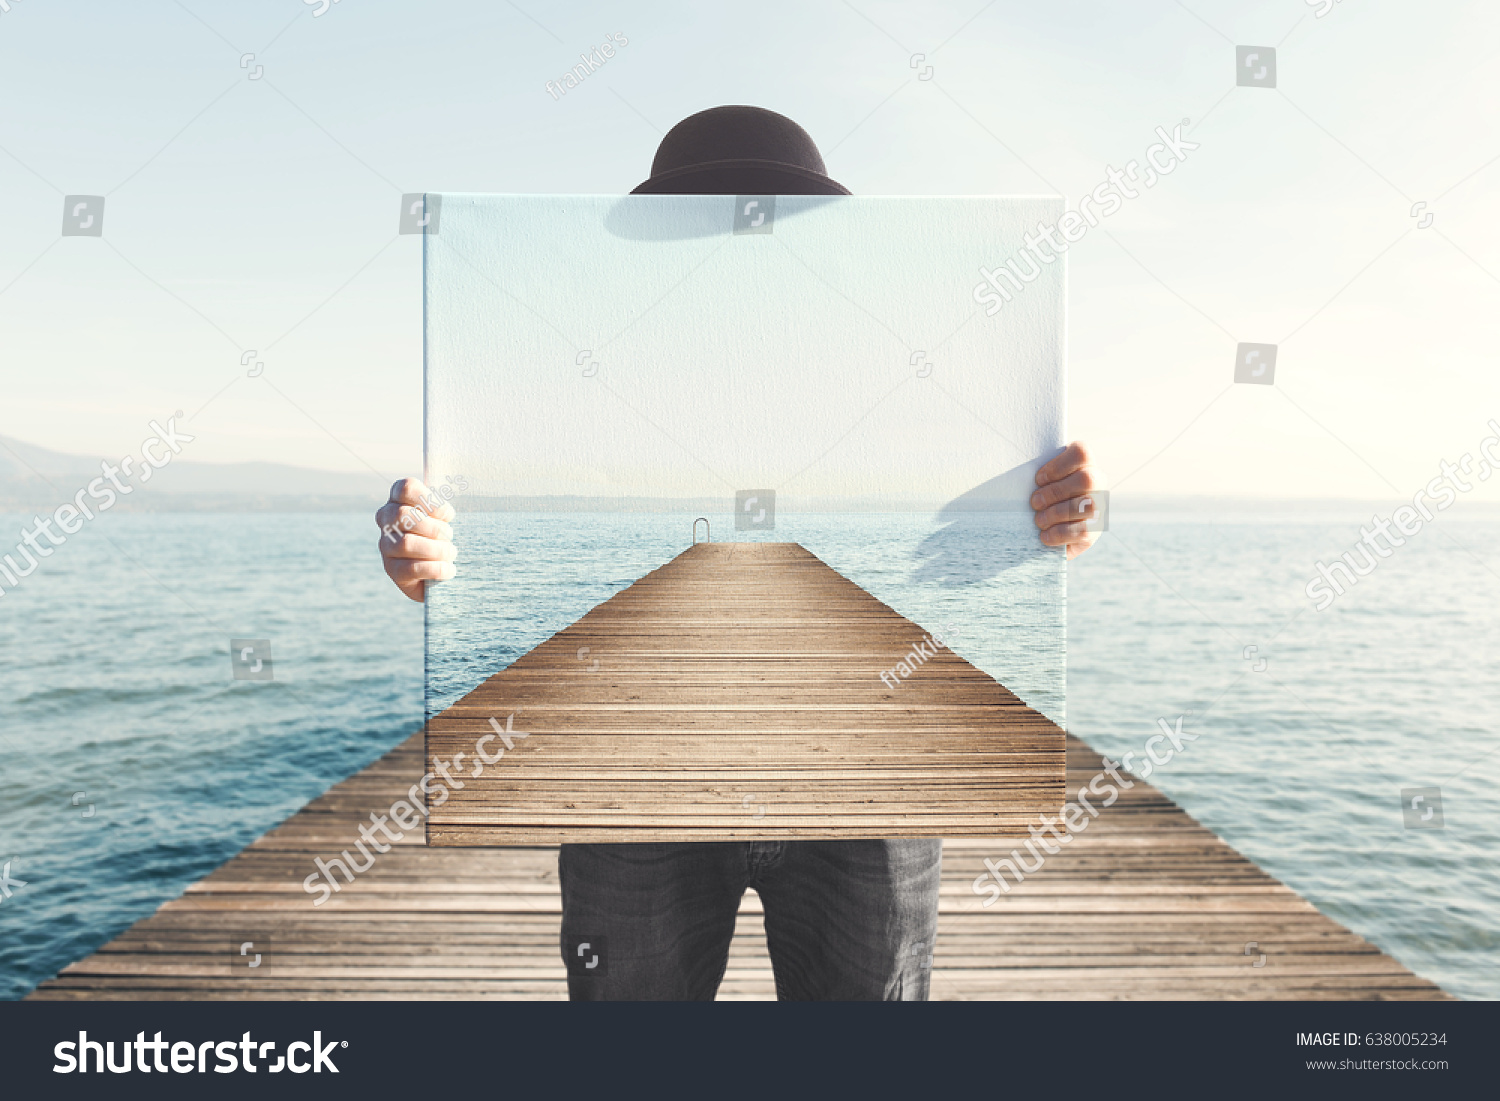 Man holding surreal painting of a boardwalk #638005234